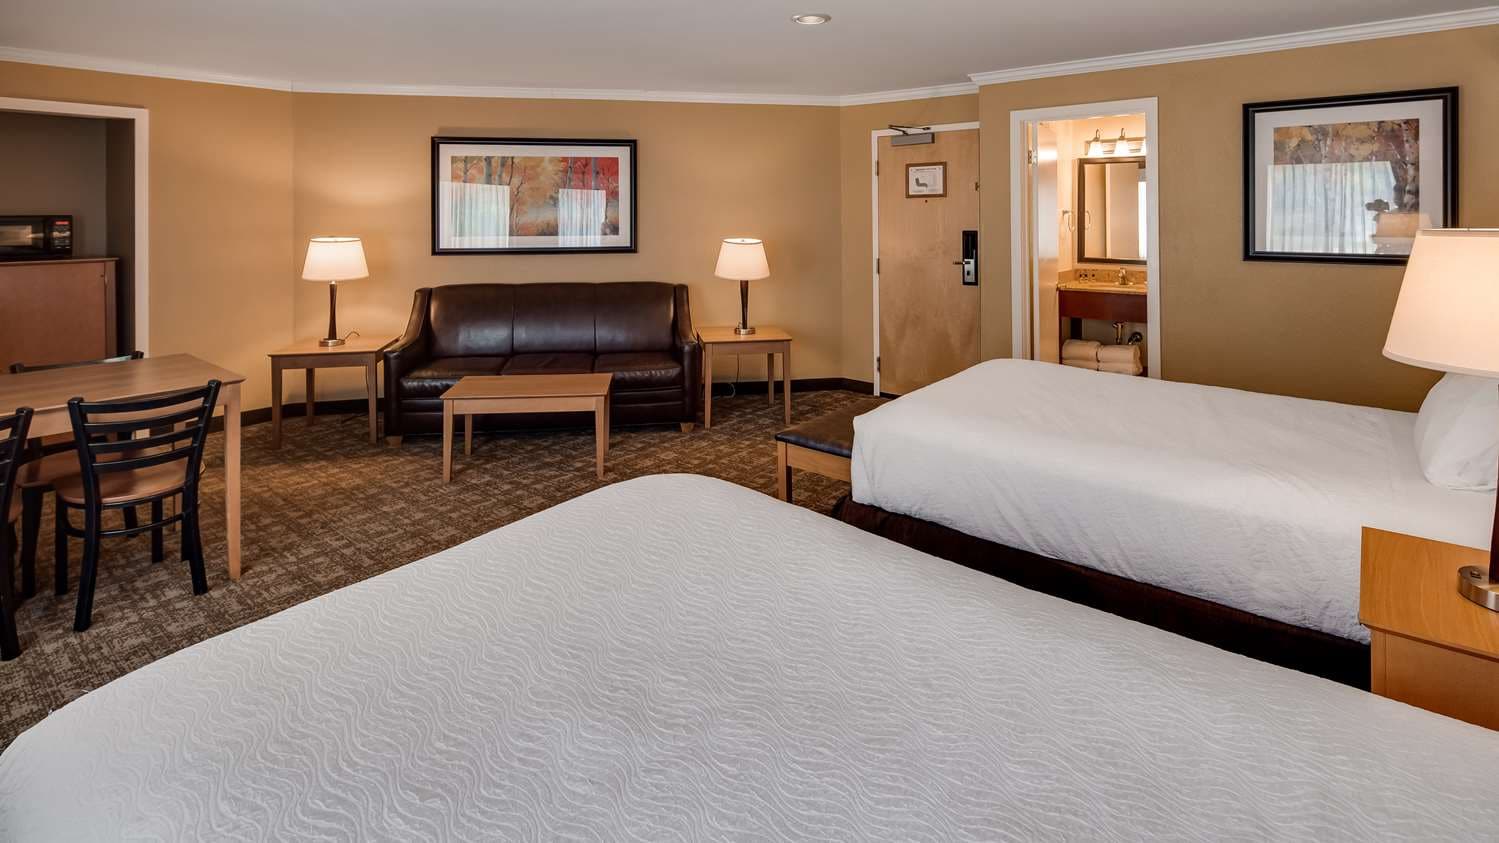 Hotel in South Burlington Best Western Plus Windjammer Inn and Conference Center image